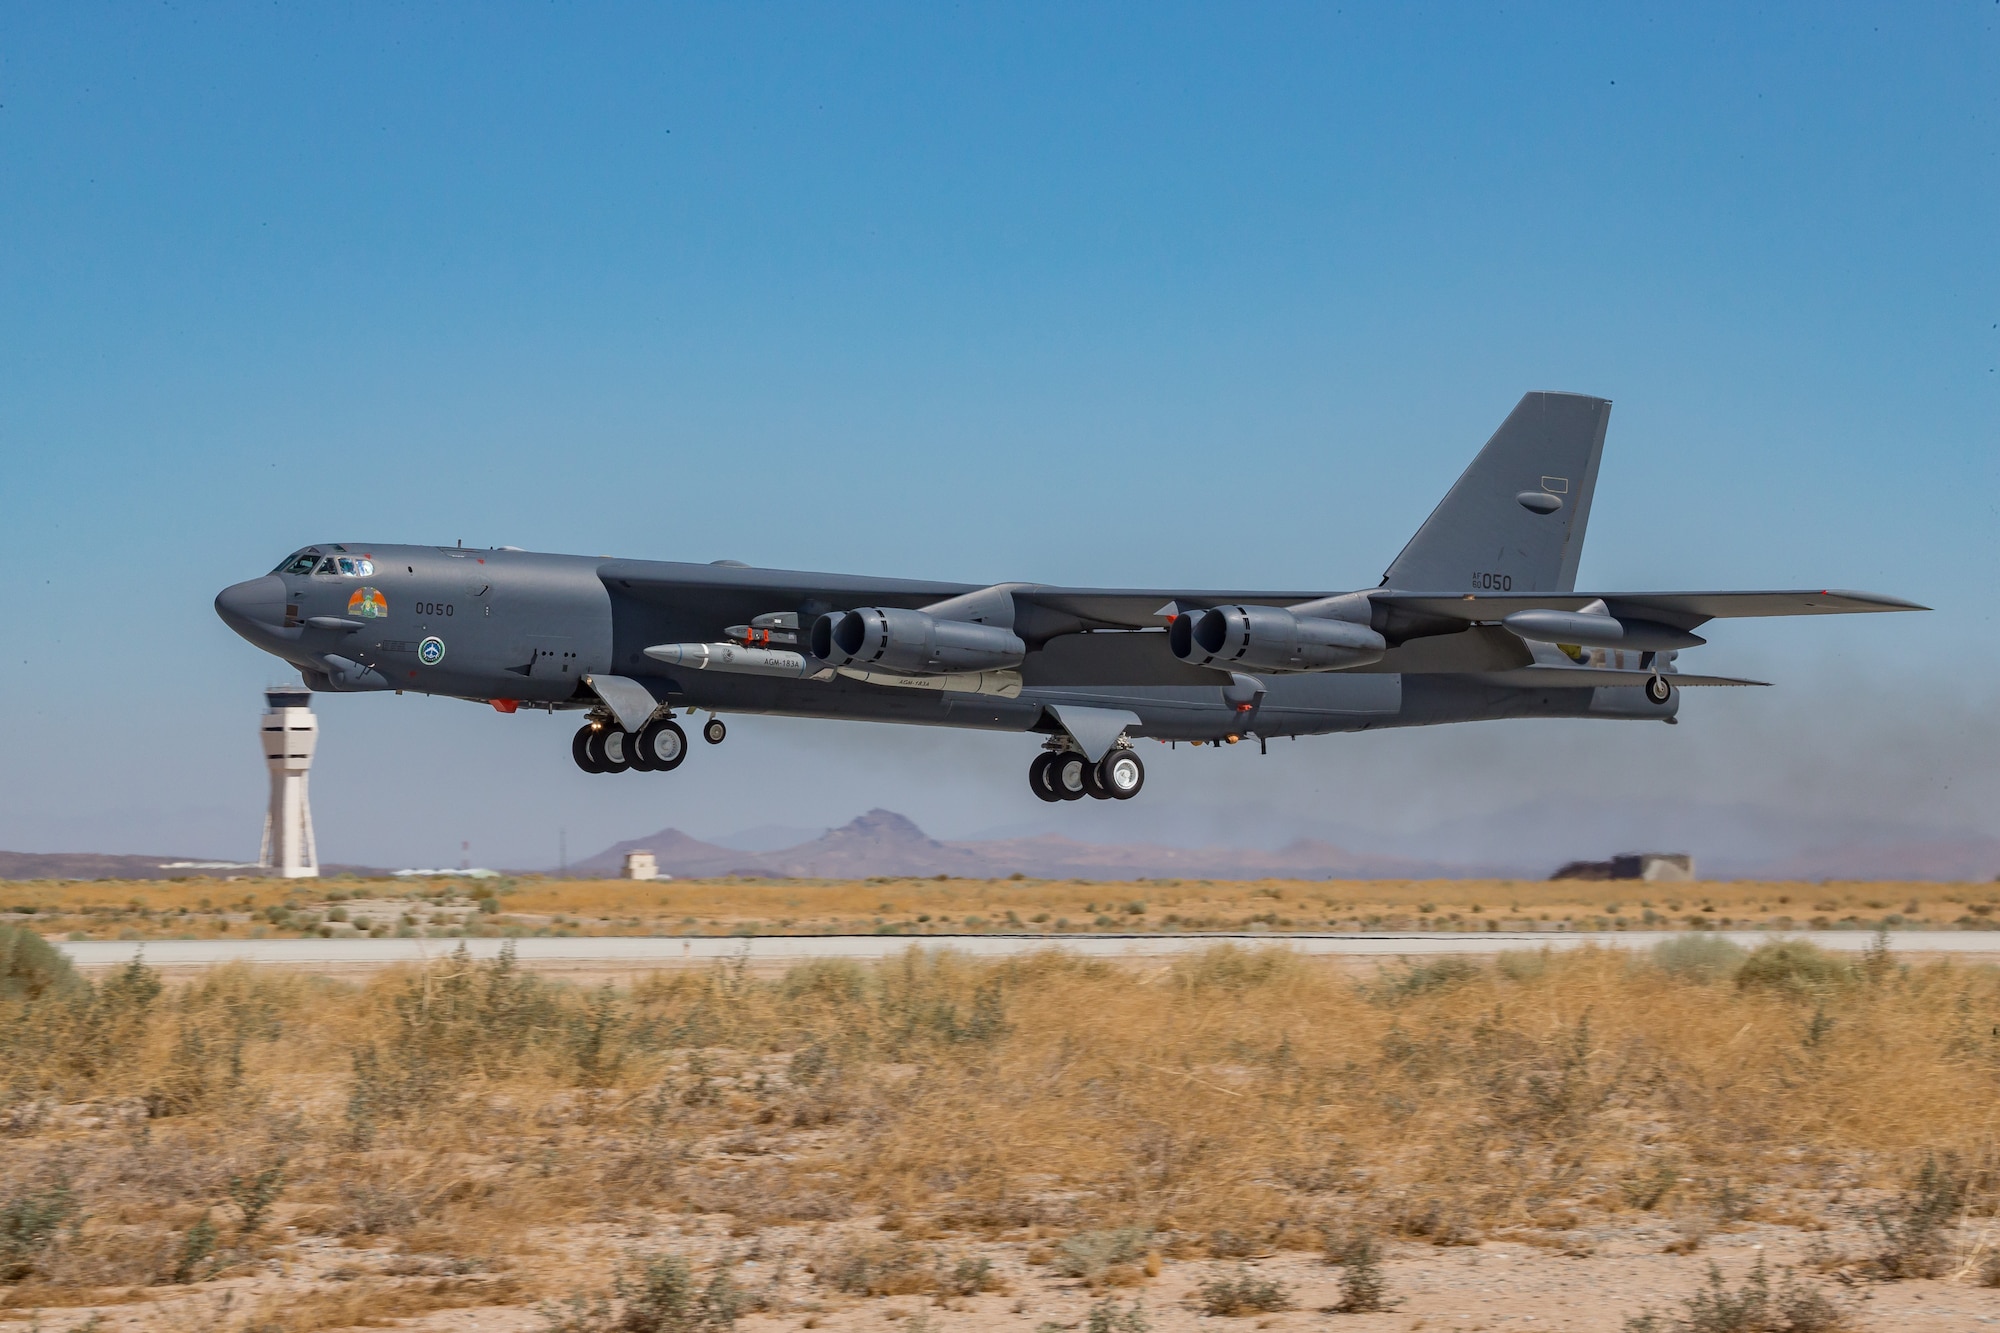 A B-52H Stratofortress assigned to the 419th Flight Test Squadron takes off from Edwards Air Force Base, California, Aug. 8, 2020. A B-52H Stratofortress successfully released an AGM-183A Air-launched Rapid Response Weapon off the Southern California coast, May 14. The ARRW is designed to enable the U.S. to hold fixed, high-value, time-sensitive targets at risk in contested environments from stand-off distances. (Air Force photo by Matt Williams)